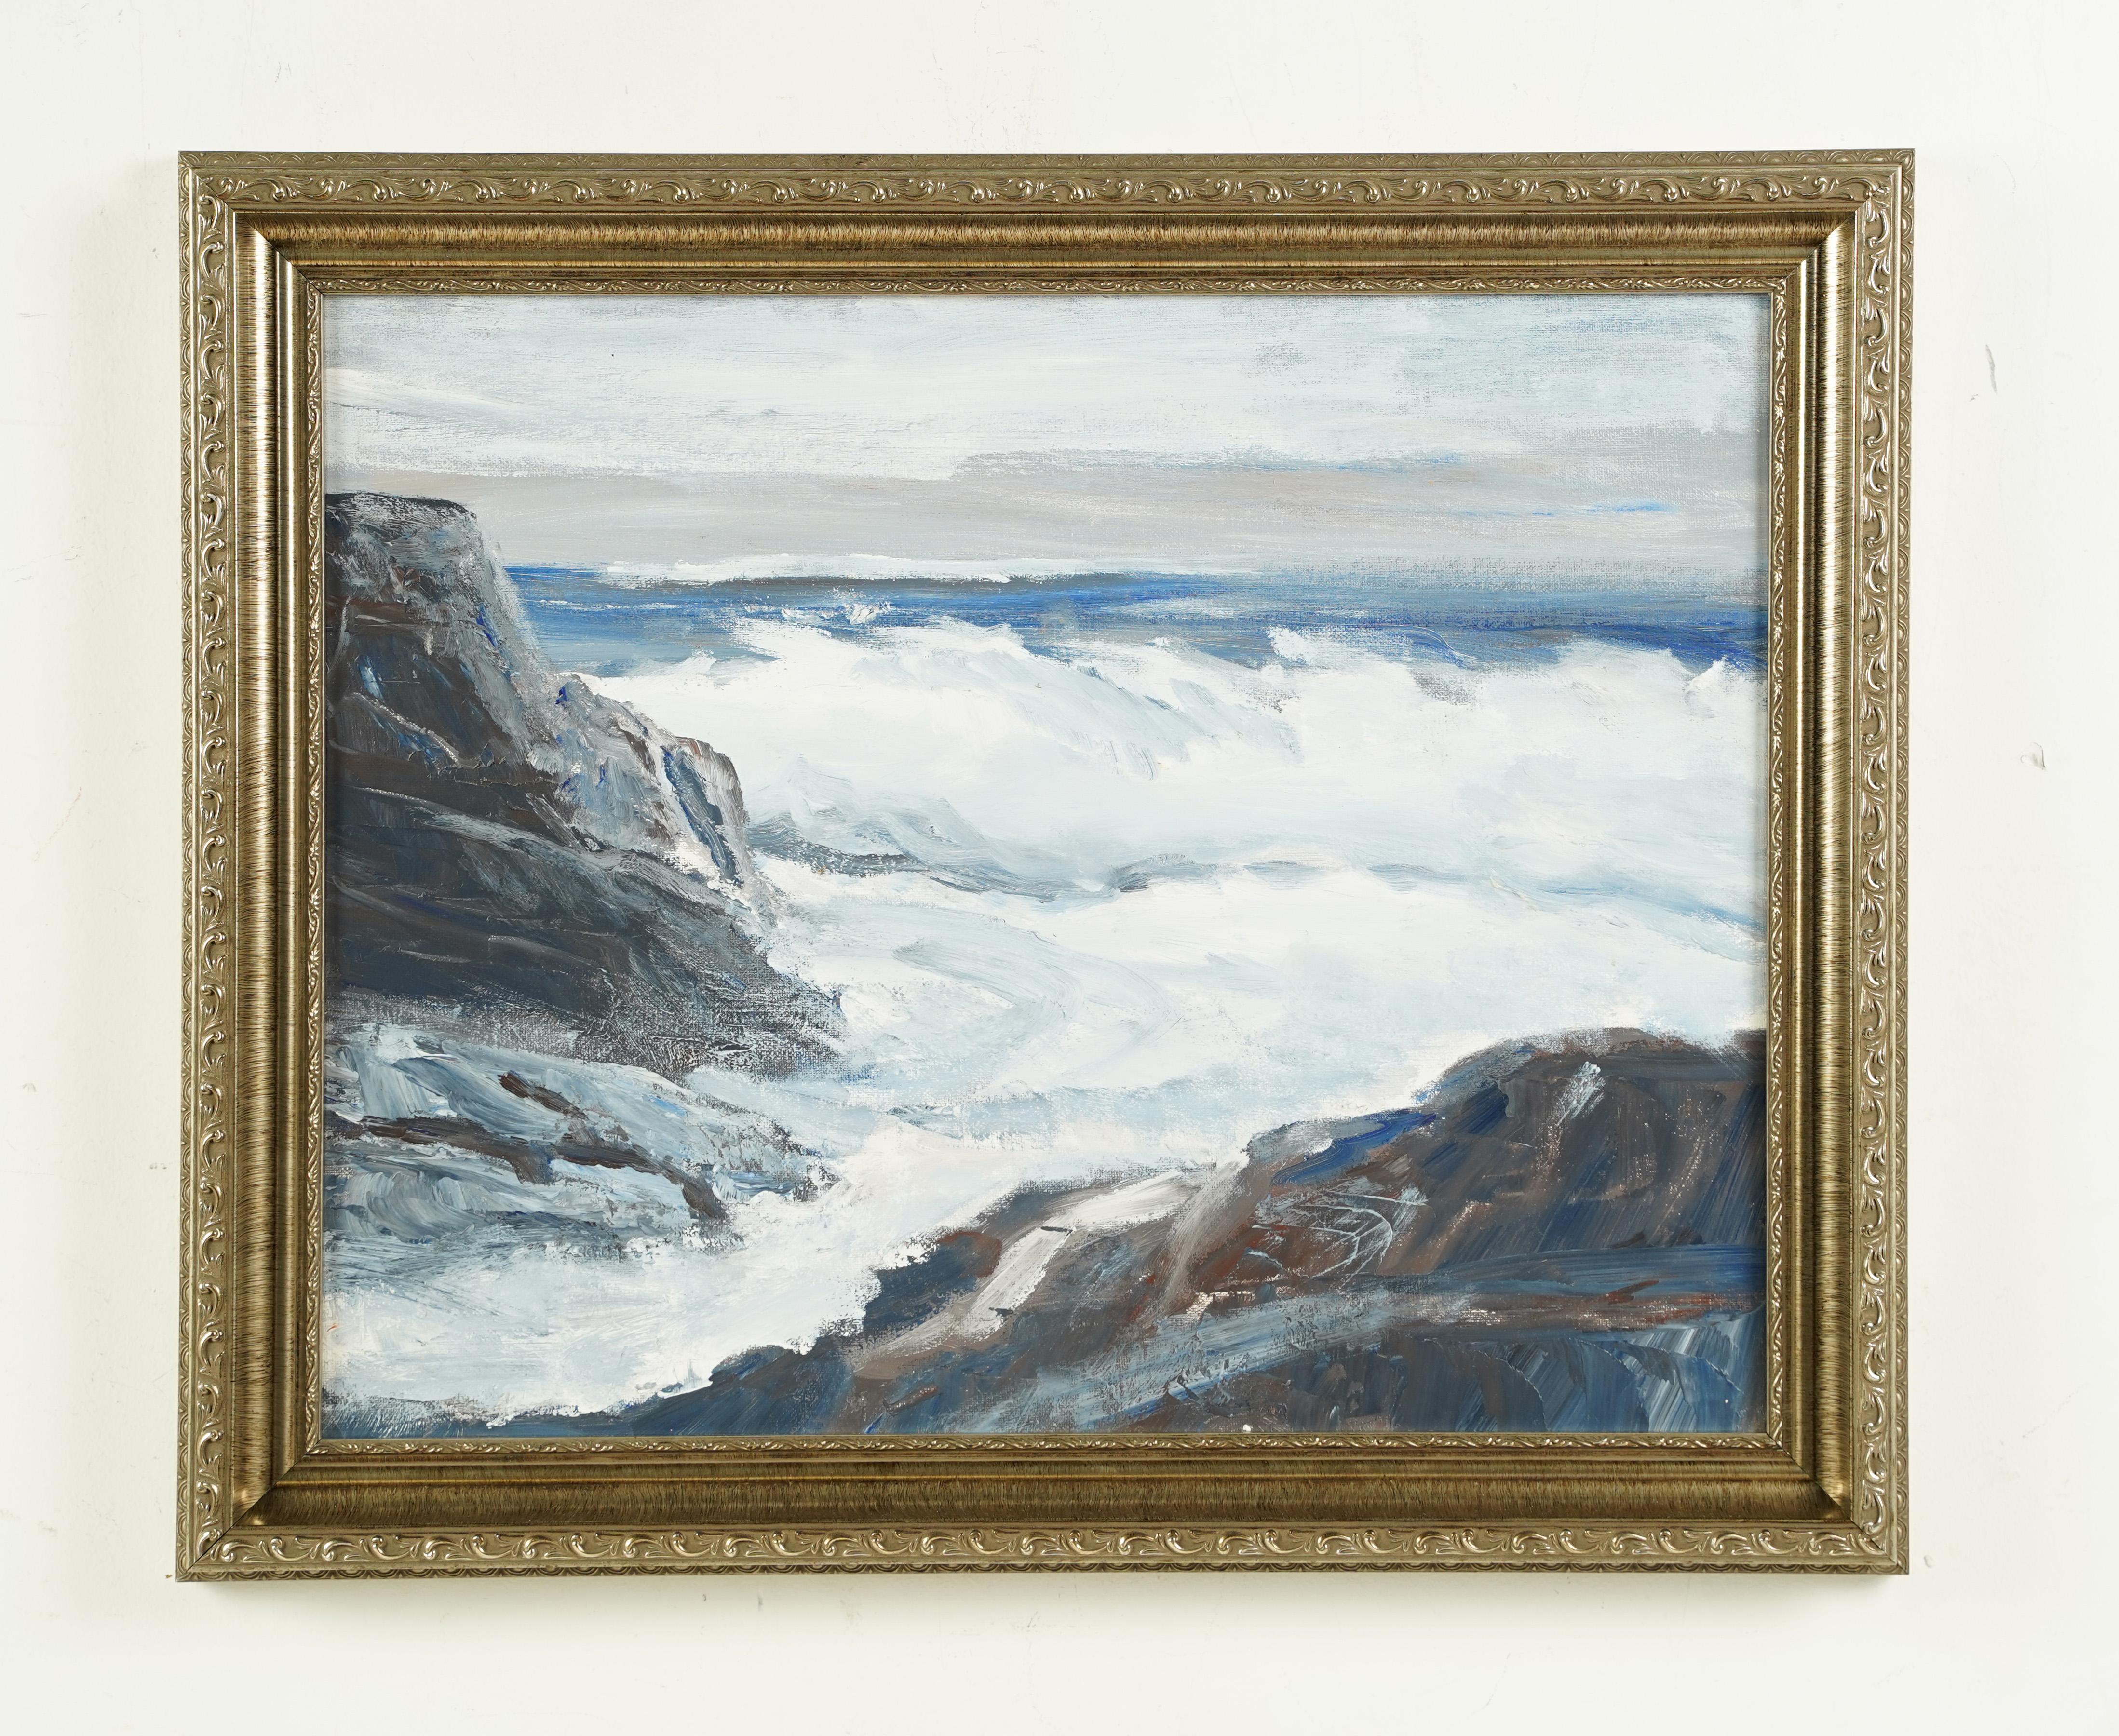 Antique American school seascape oil painting.  Oil on board. Framed.  Unframed.  Image size, 20L x 16H.